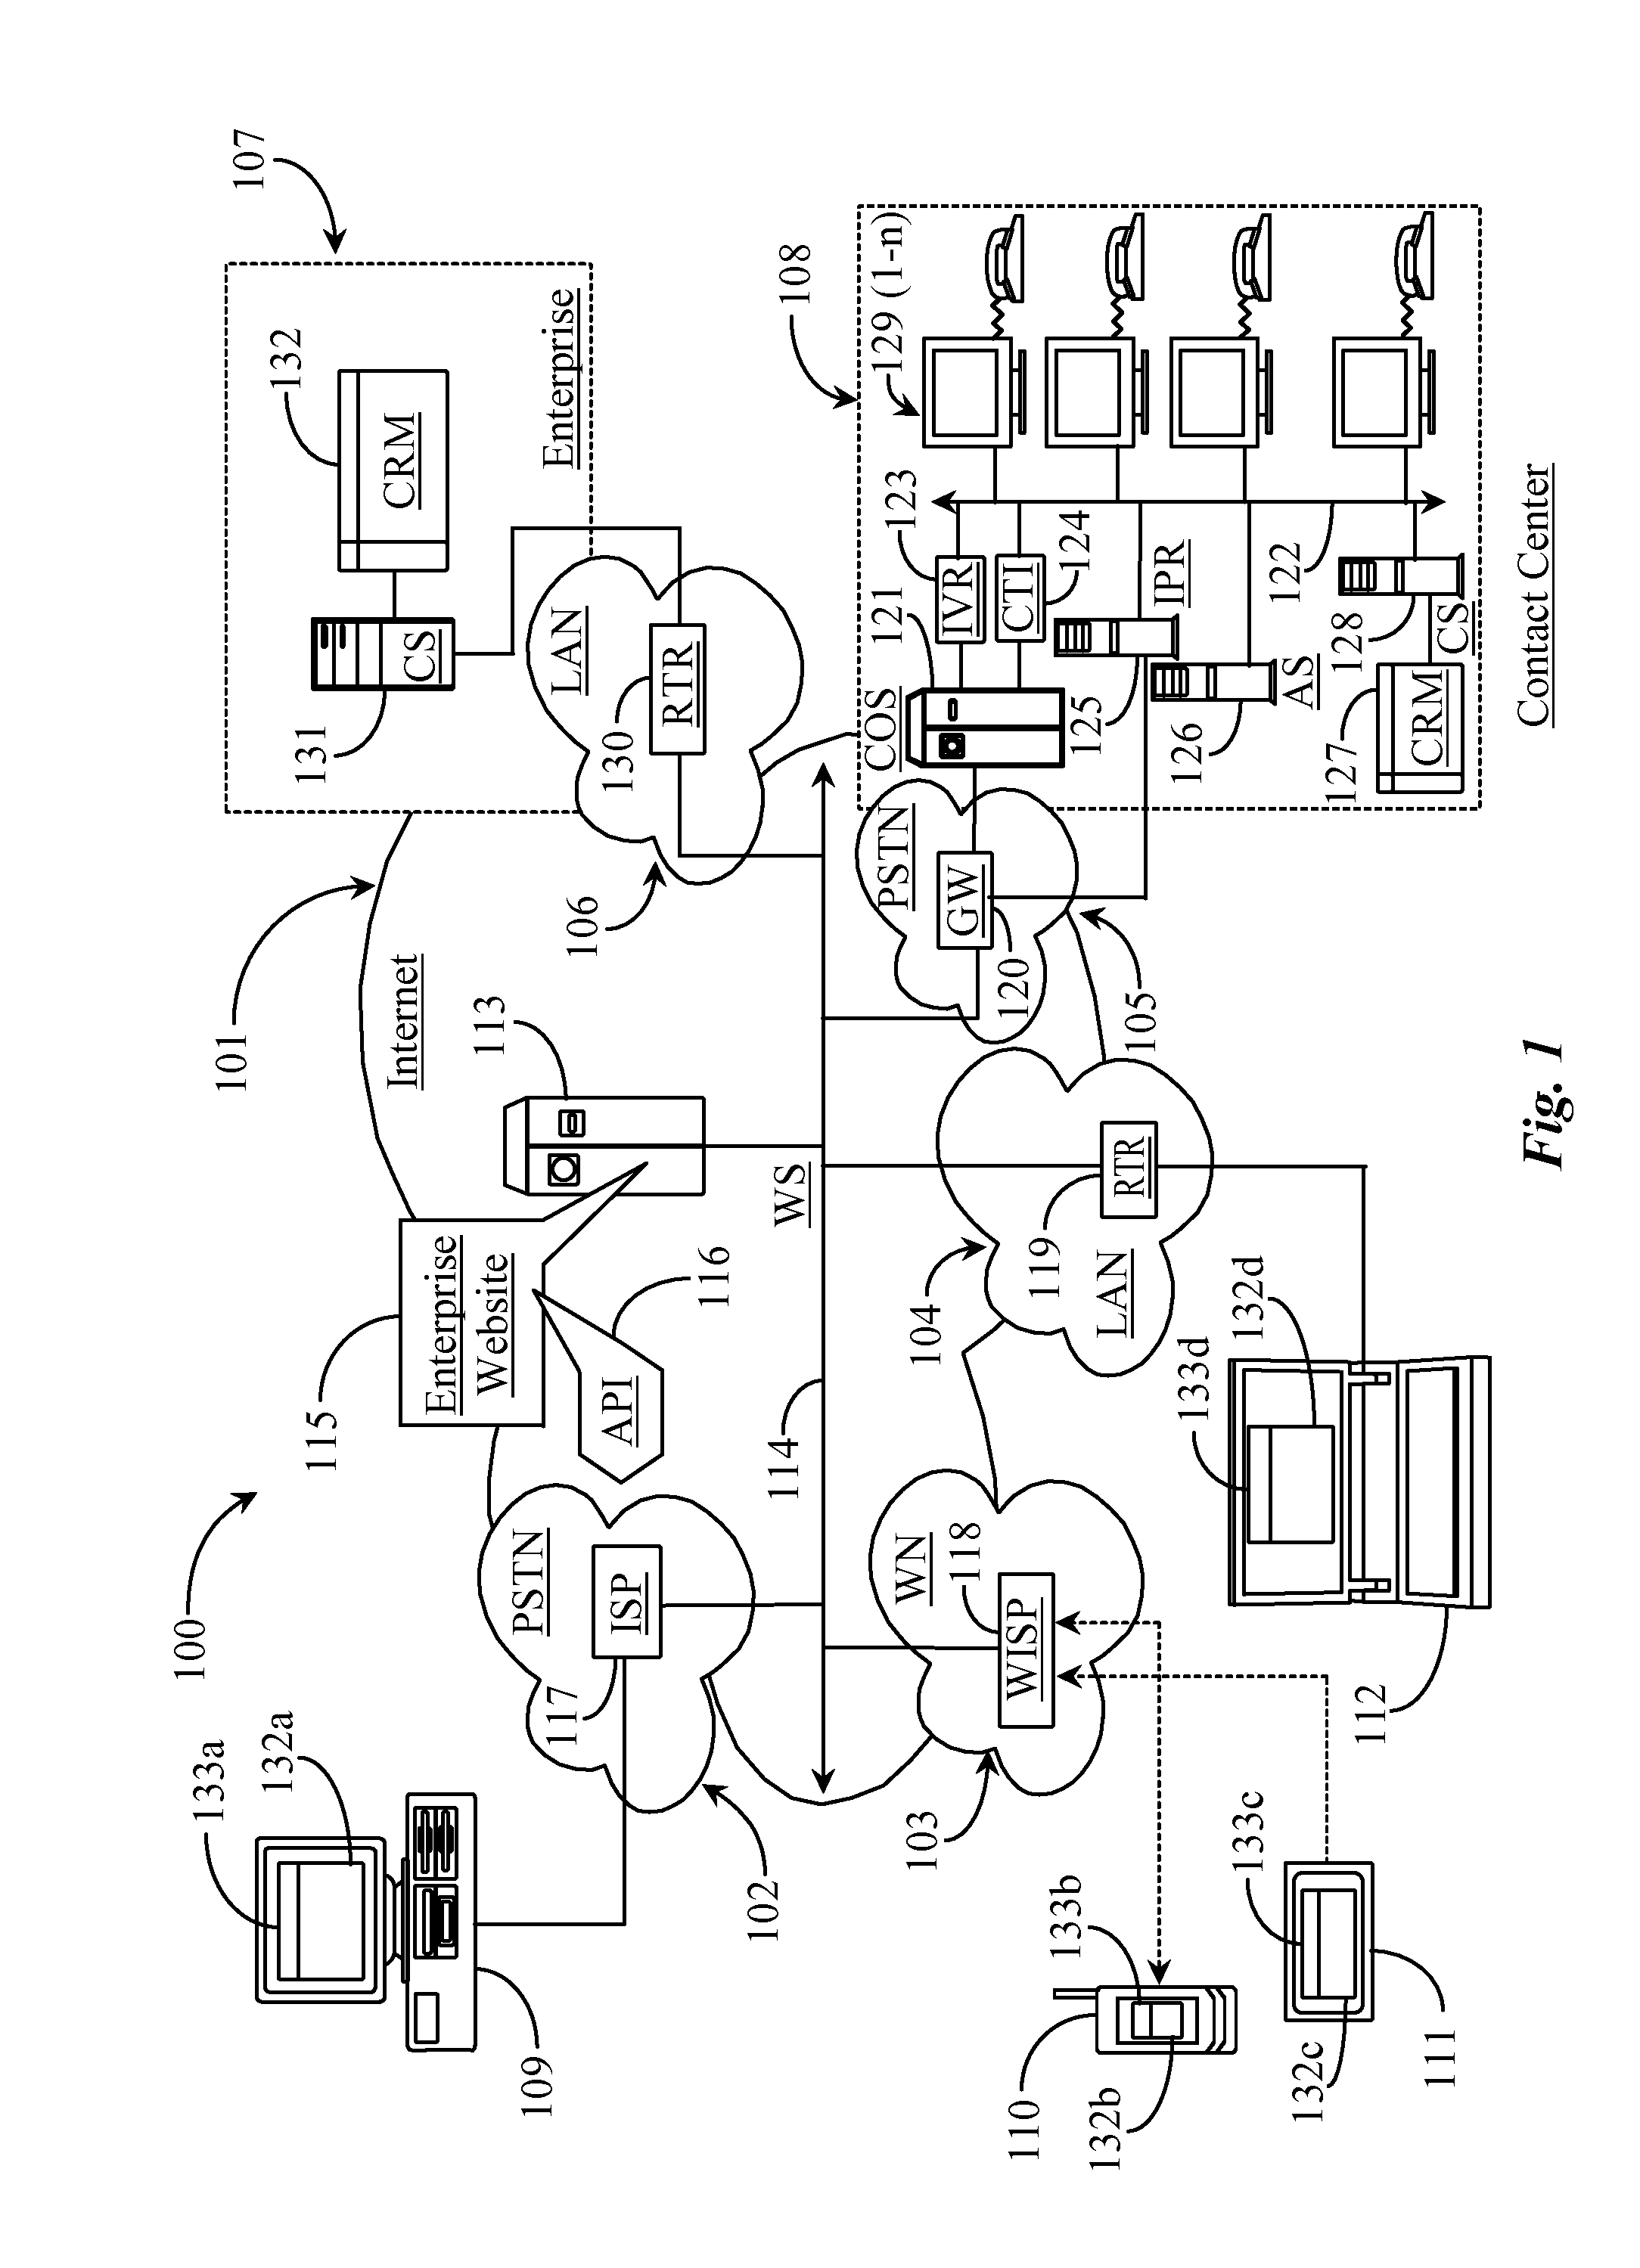 Network-Based Information and Advertising System